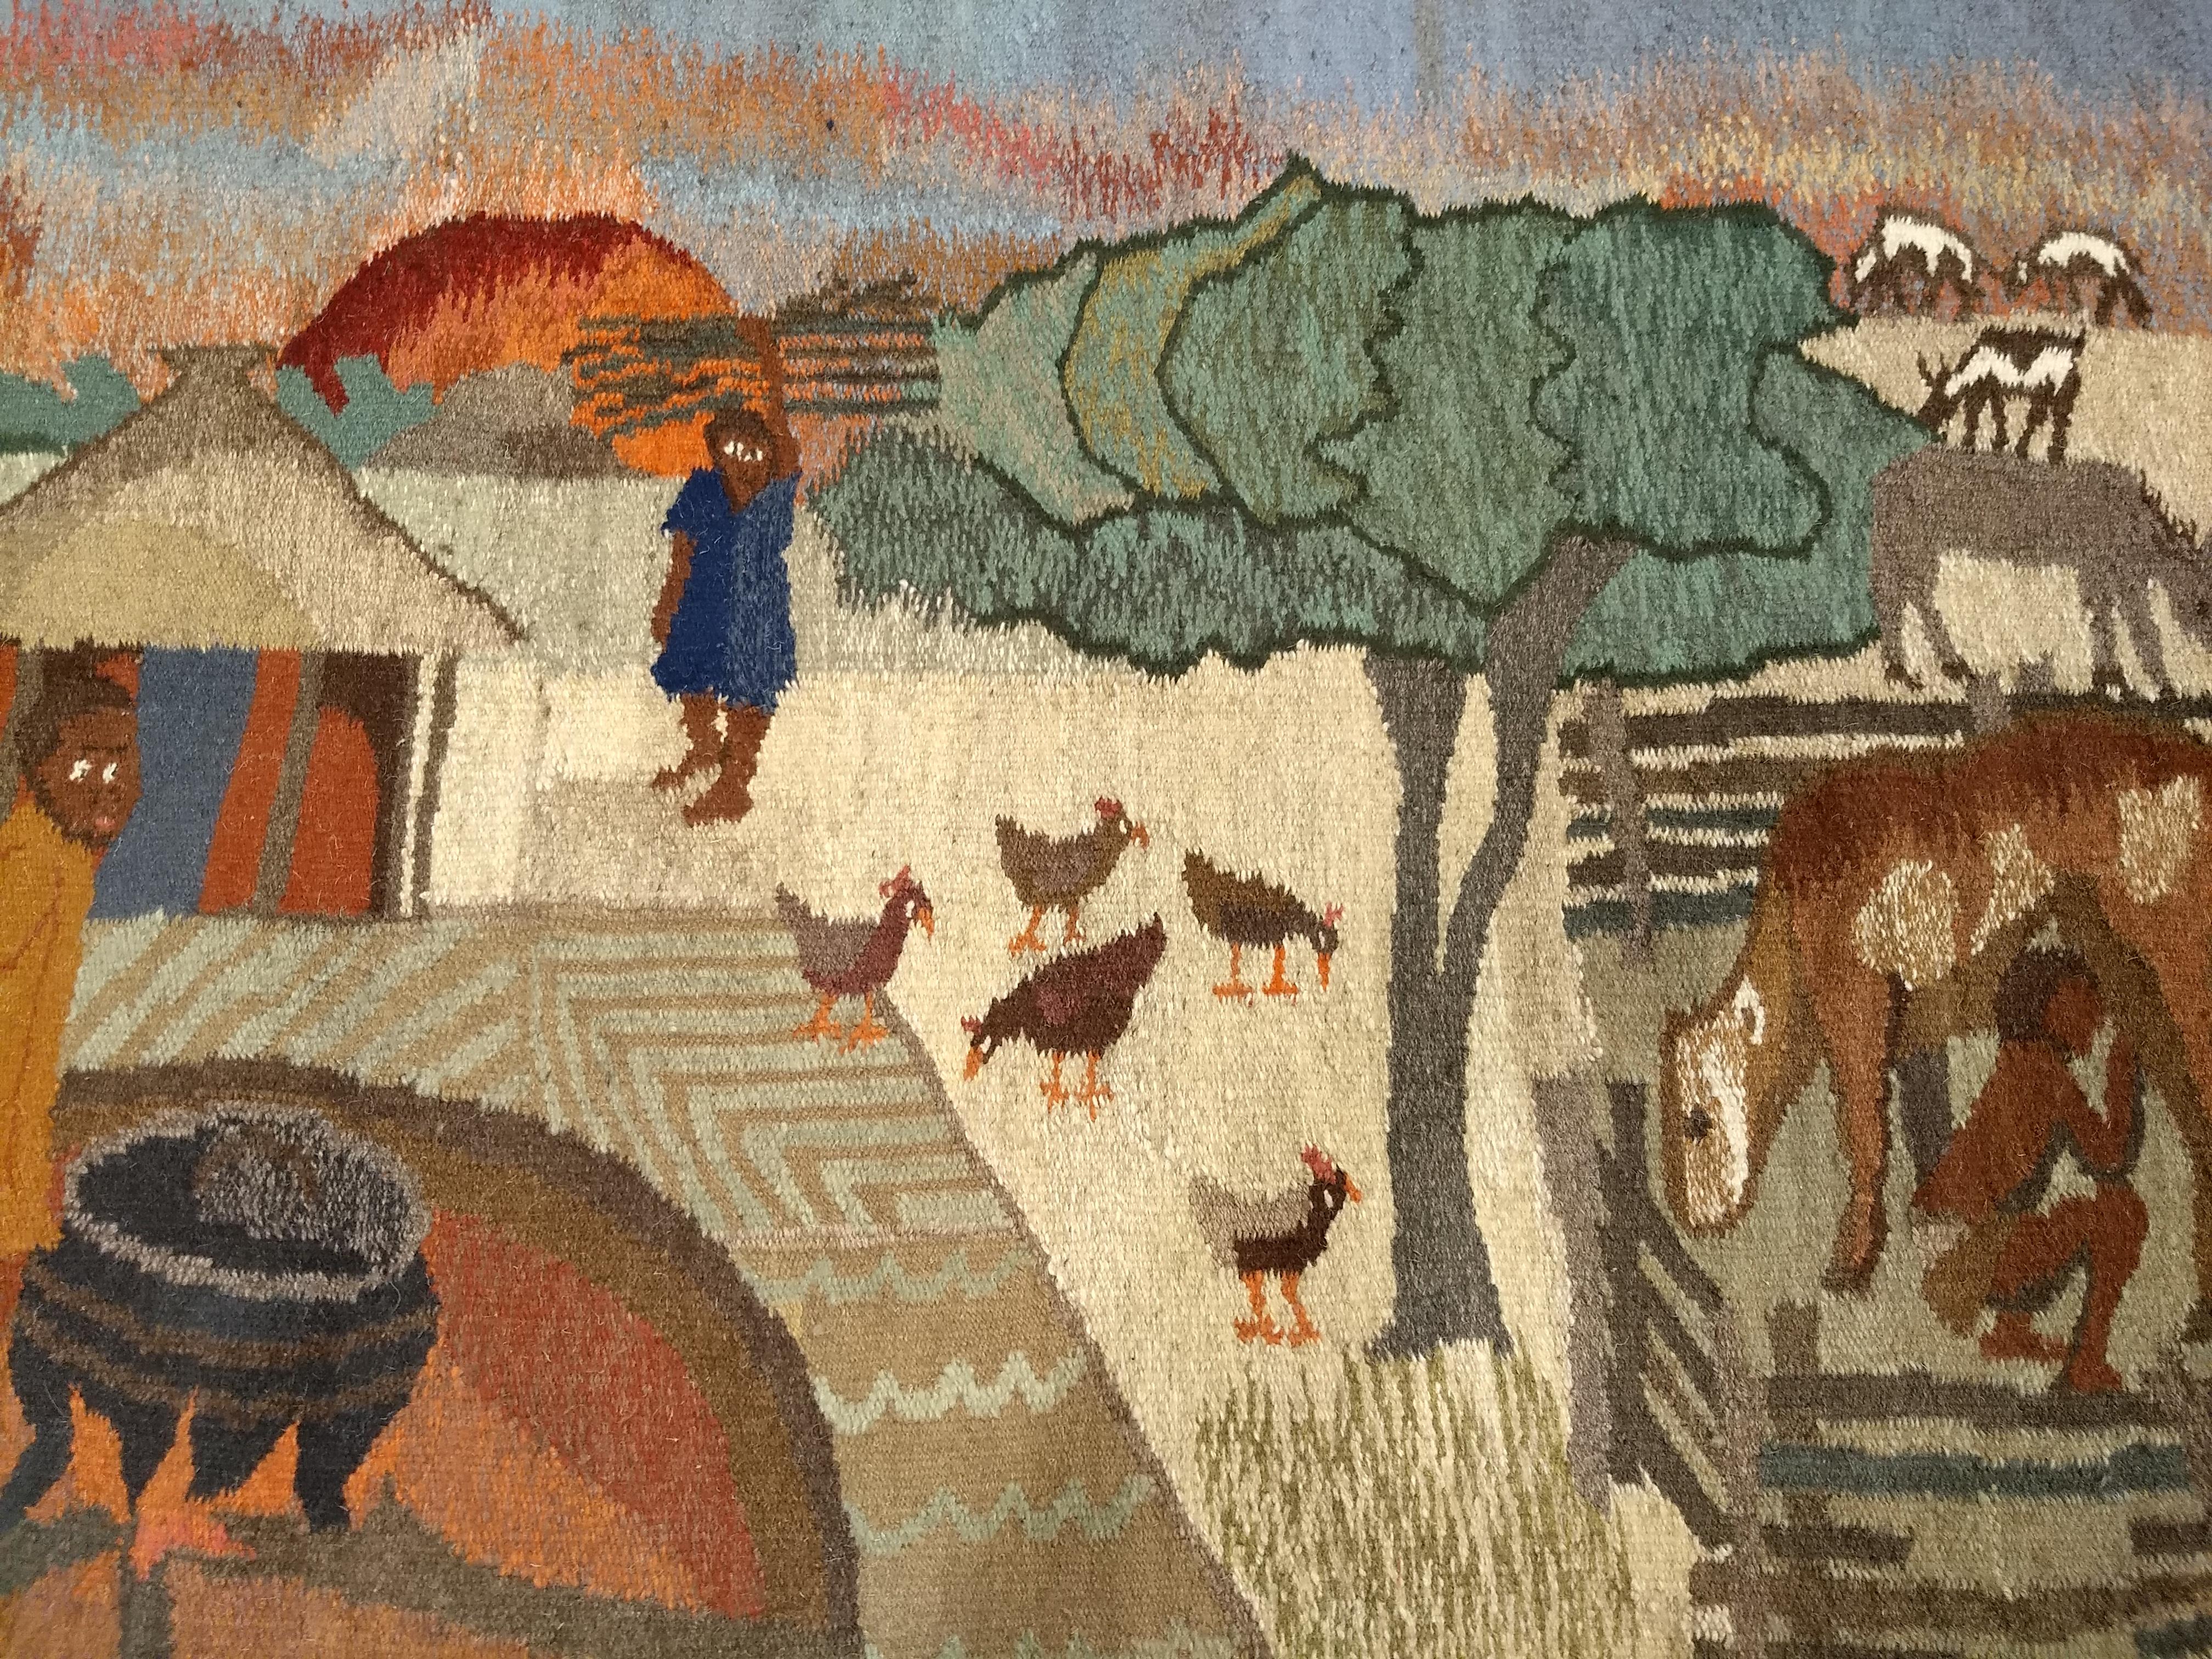 Wool Vintage Hand Woven African Tapestry Depicting Life Scenes Around a Village For Sale